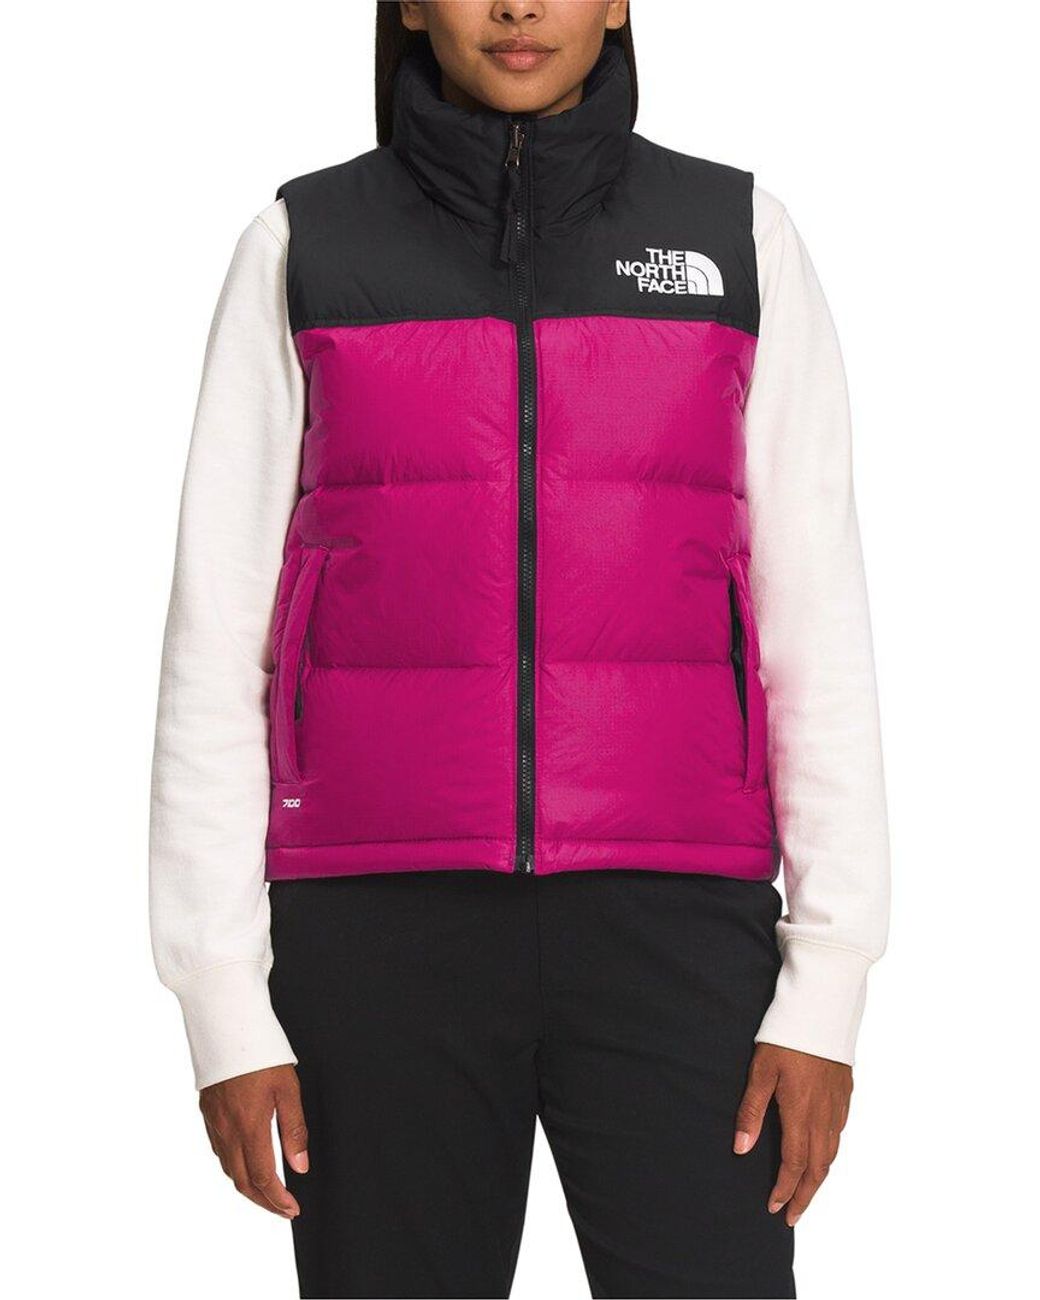 The North Face Jackets and Puffer Vests Are on Sale at Gilt